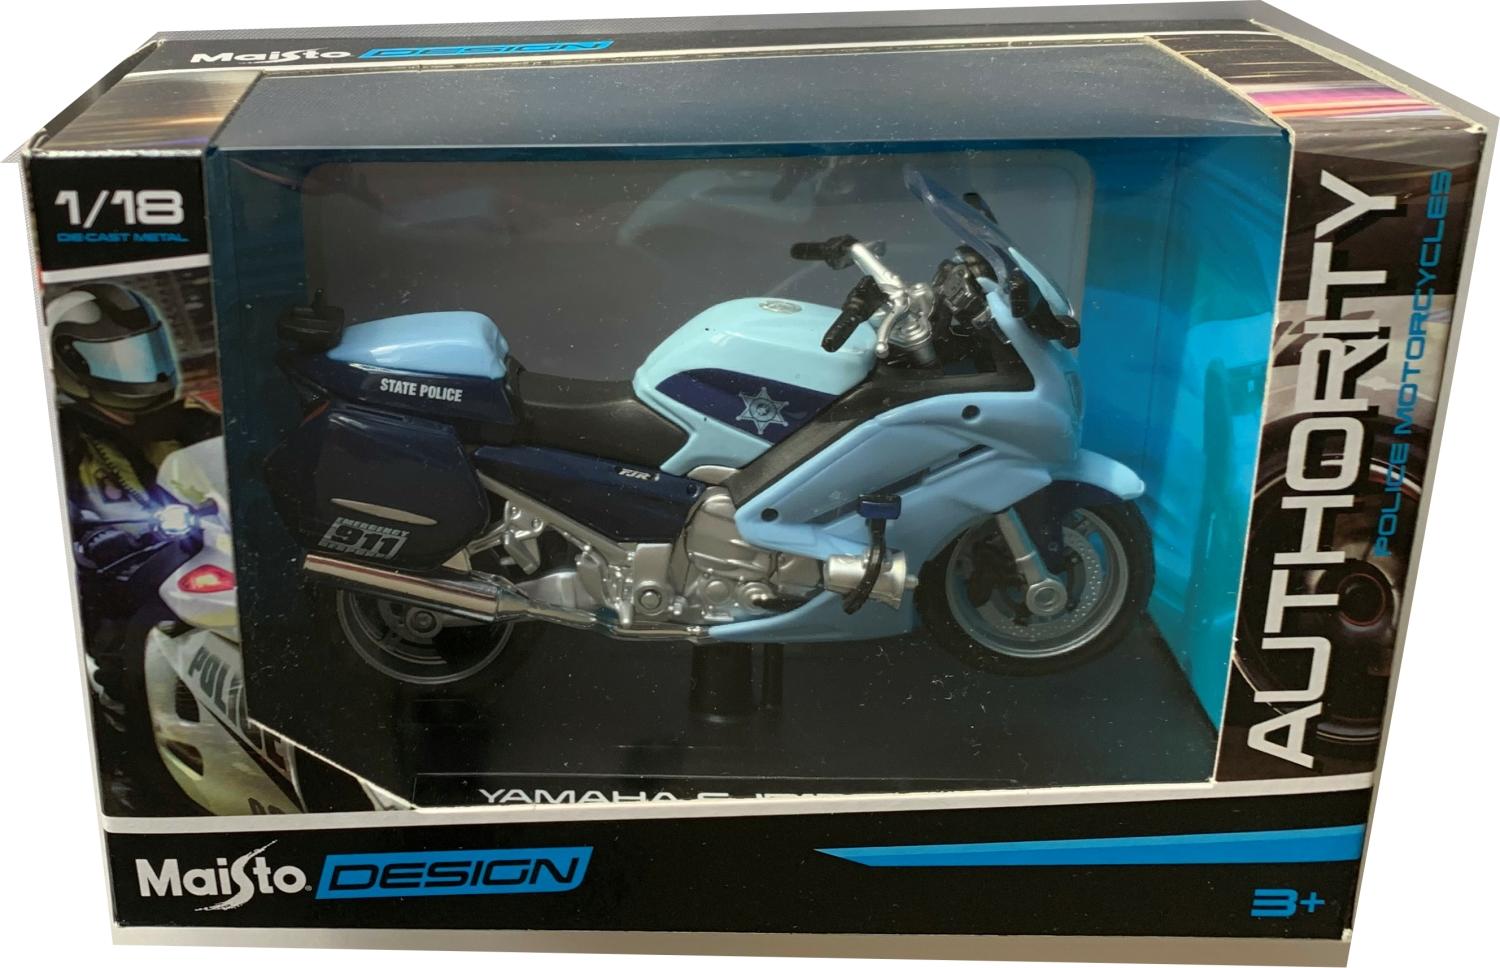 Yamaha FJR 1300A State Police Authority in blue 1:18 scale model from Maisto